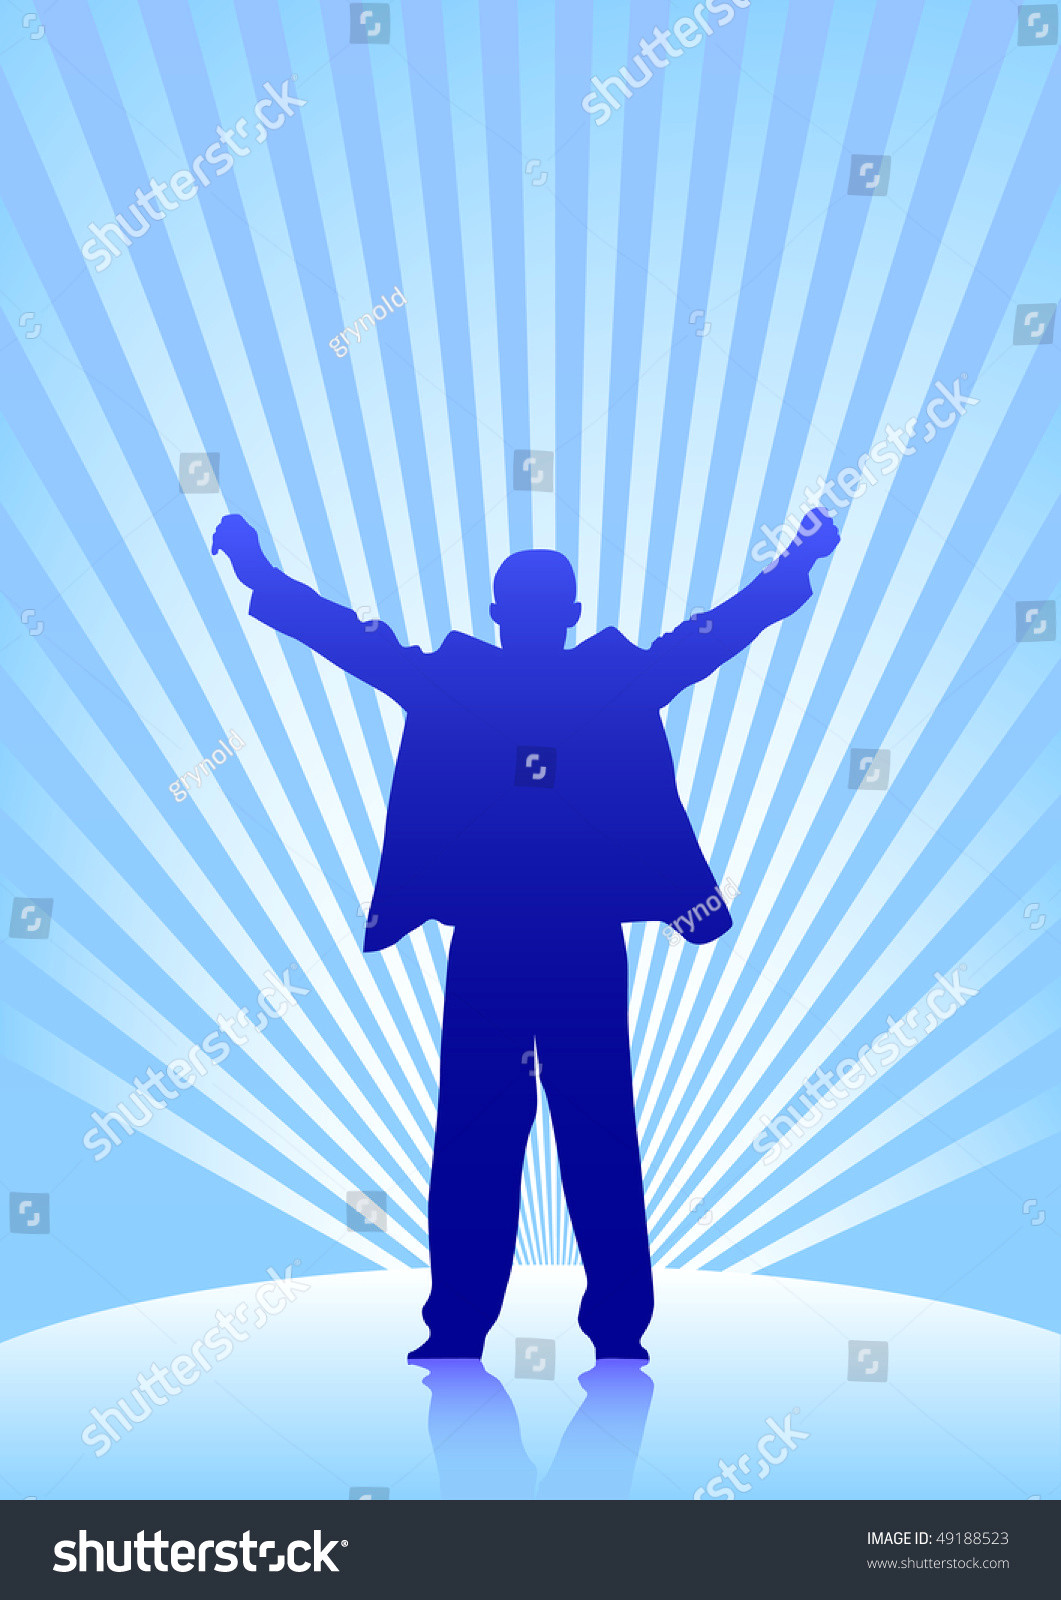 Drawings Of Raised Hands Drawing Rights Hands Raised Stock Illustration Royalty Free Stock